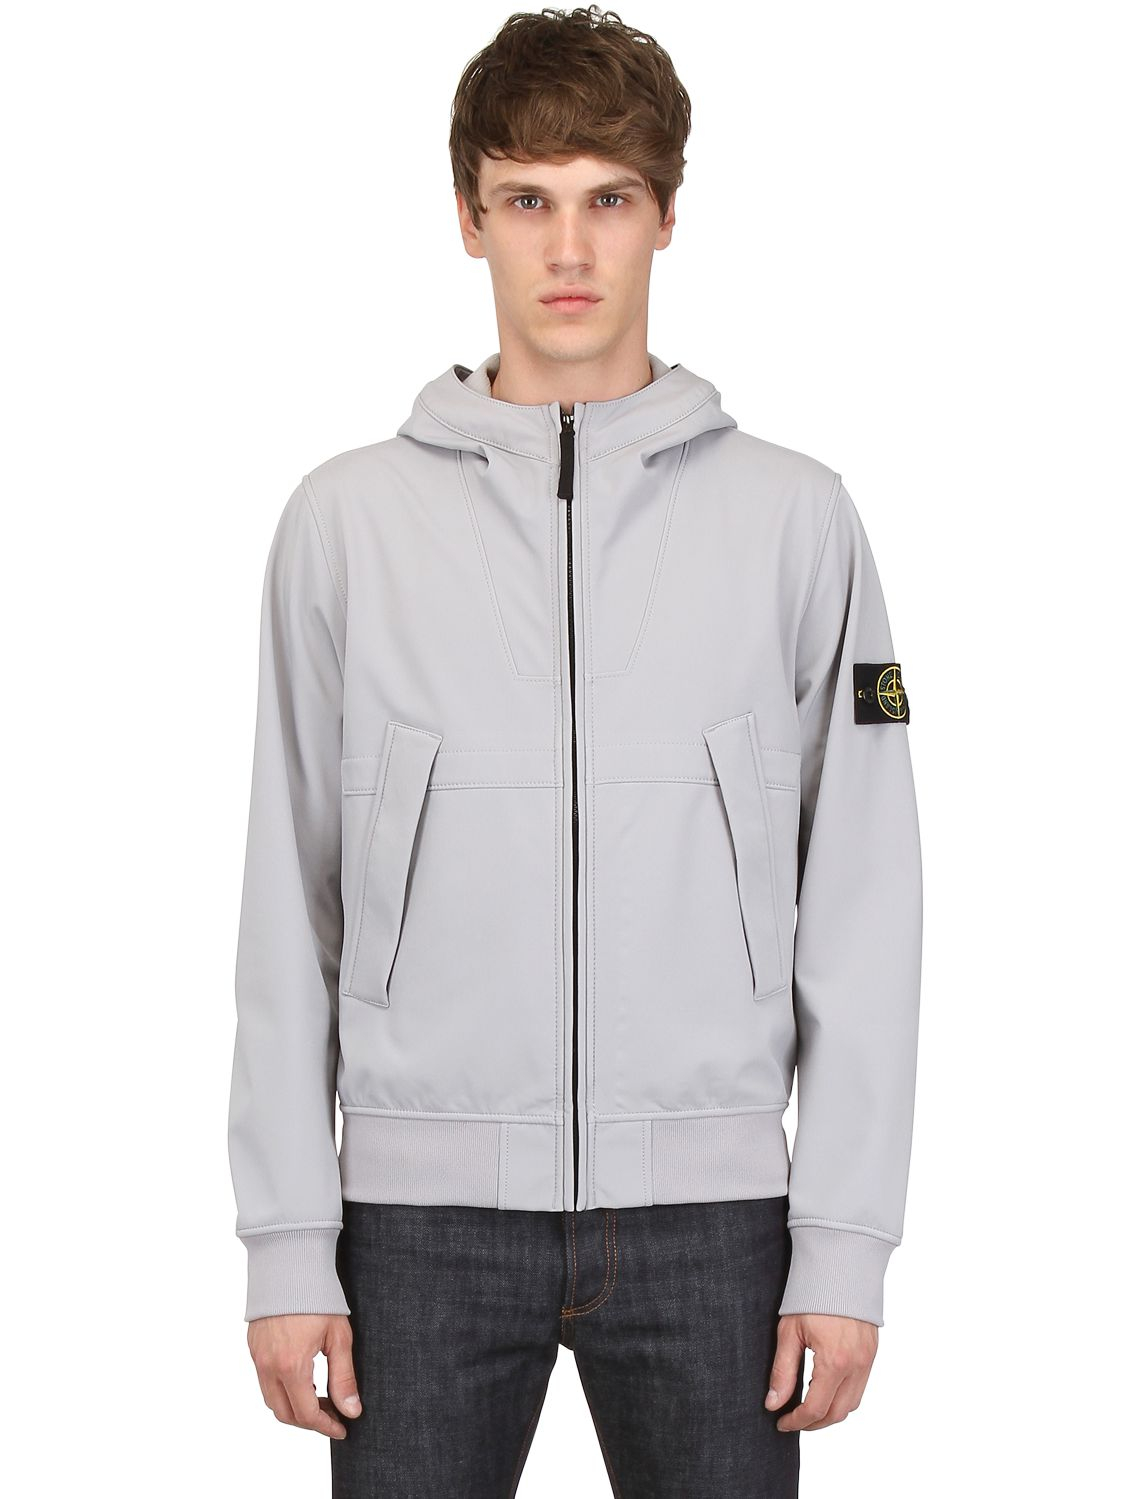 Stone Island Soft Shell Grey Sale Online, SAVE 47% - aveclumiere.com